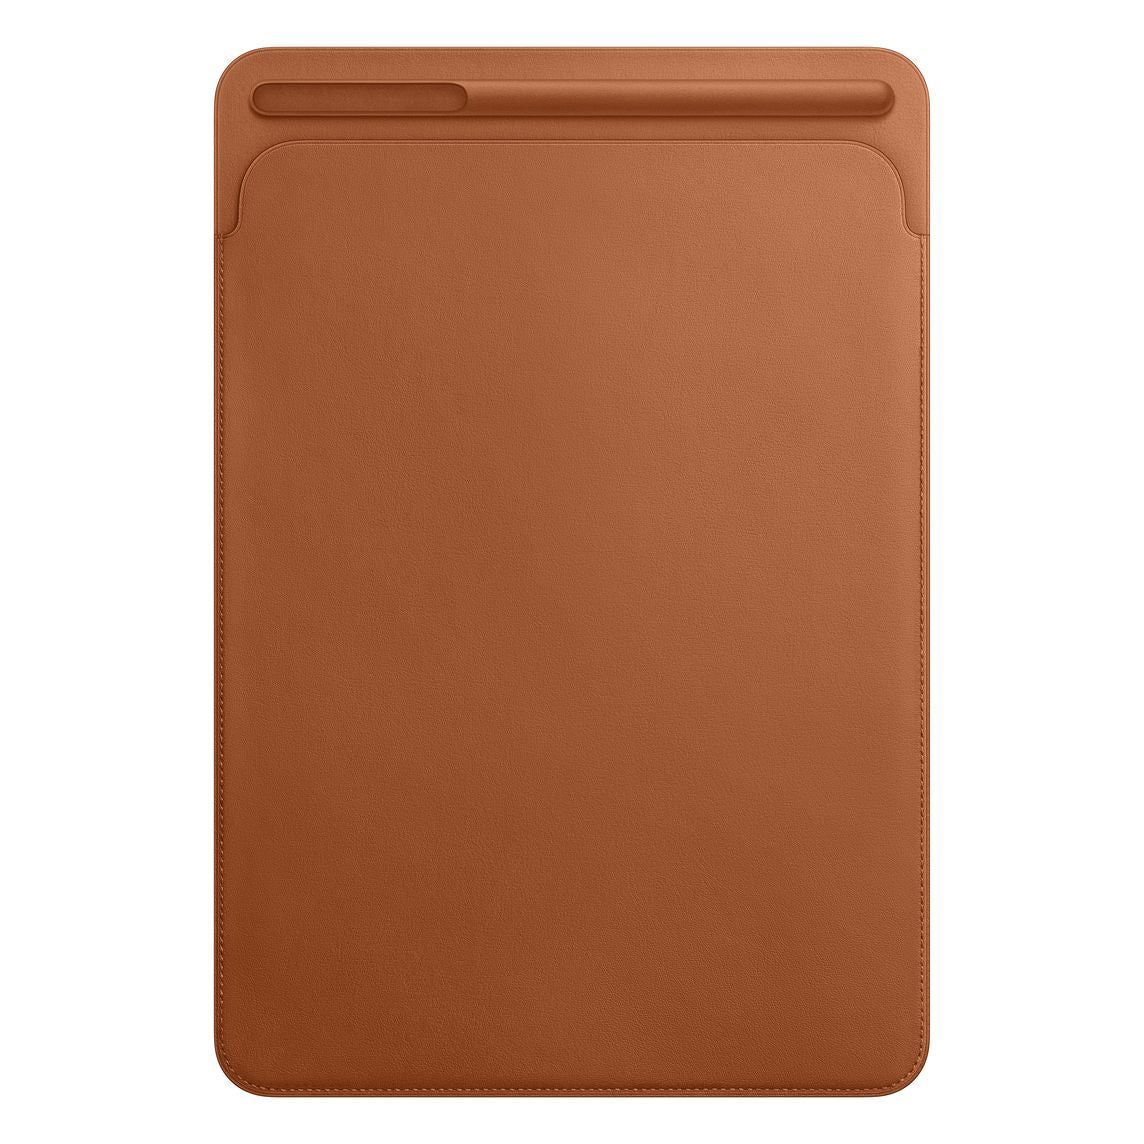 Leather Sleeve for 10.5-inch Ipad Pro